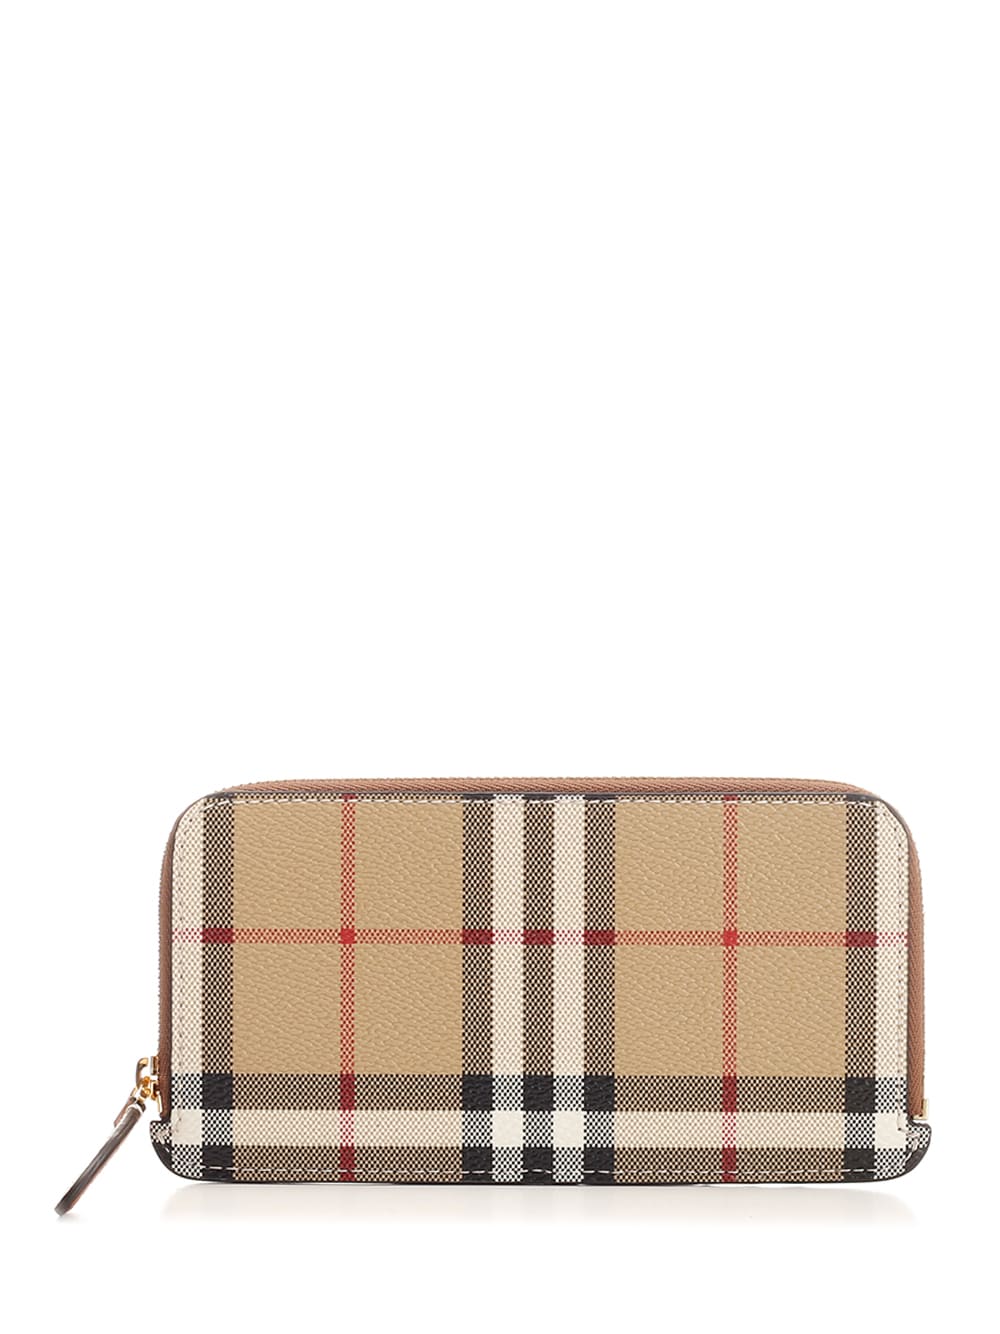 Burberry Credit Card Case